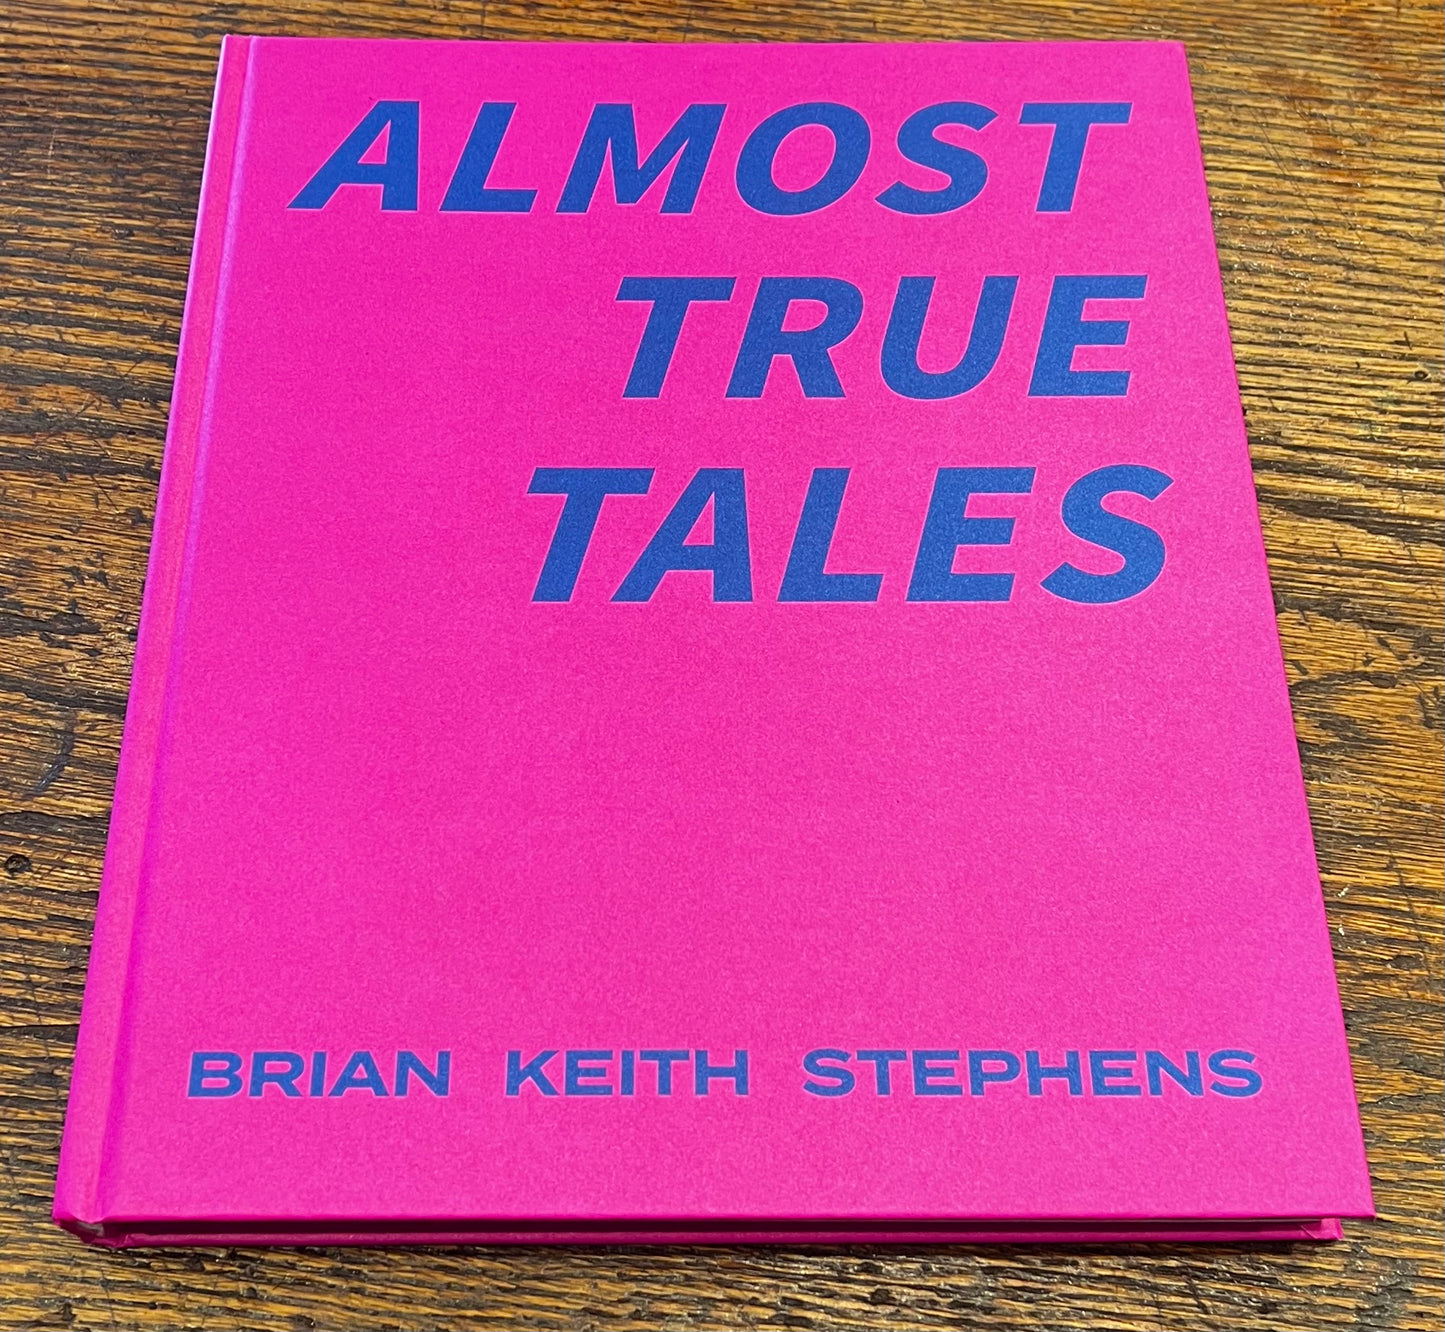 Brian Keith Stephens "Almost True Tales"